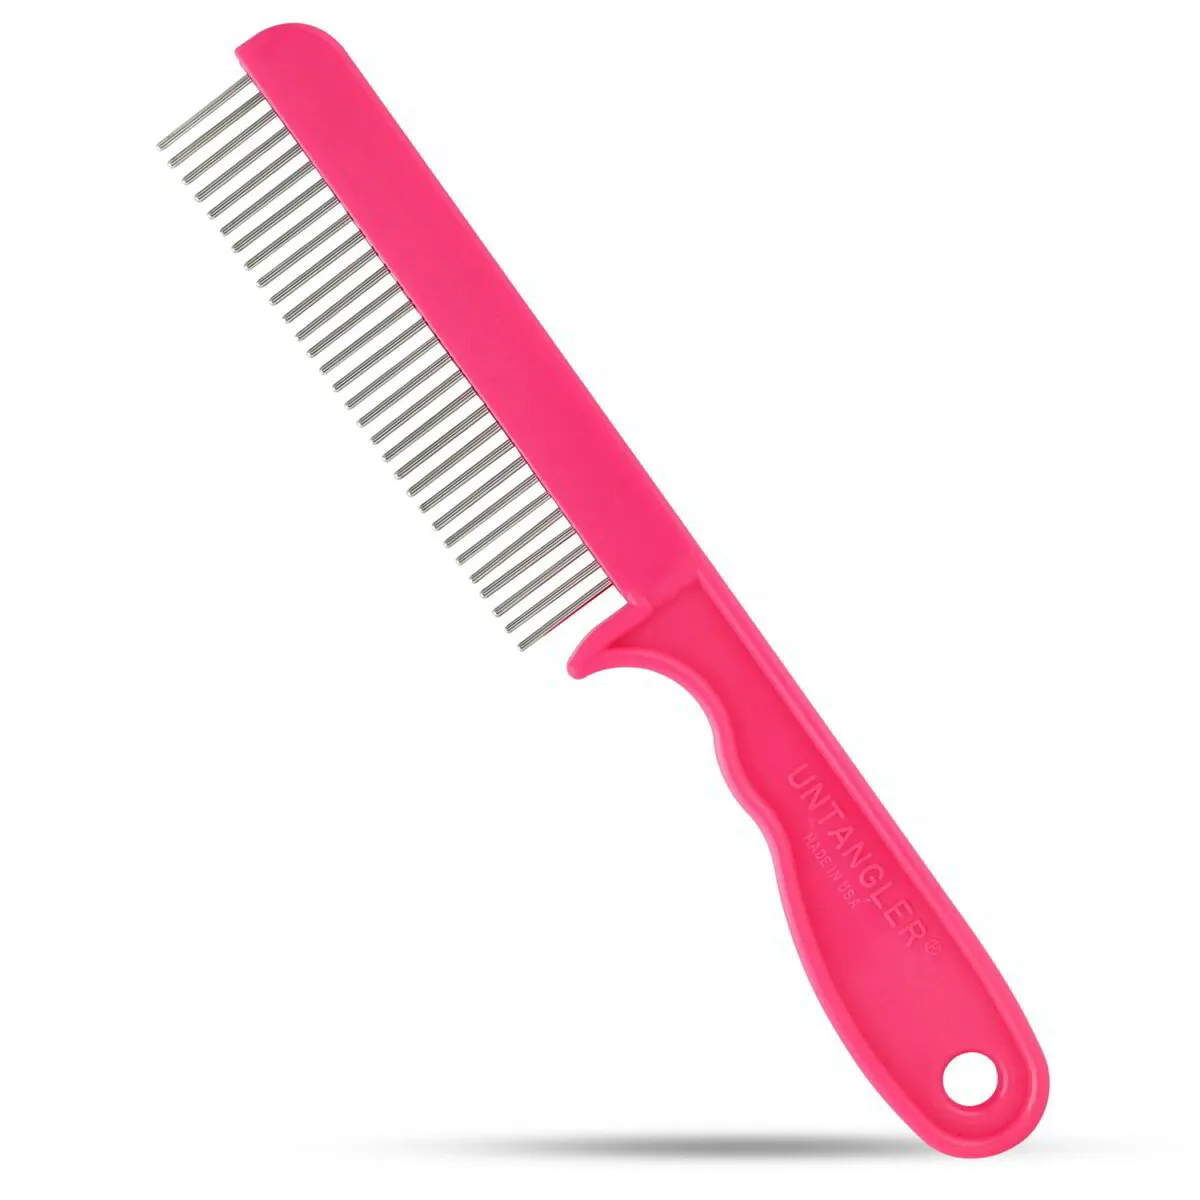 The Untangler - Super Groom Comb II (30 Fine-spaced Stainless Steel teeth) – with Rotating Teeth for untangling mats. Best Seller for Small Breeds! (T735SS)